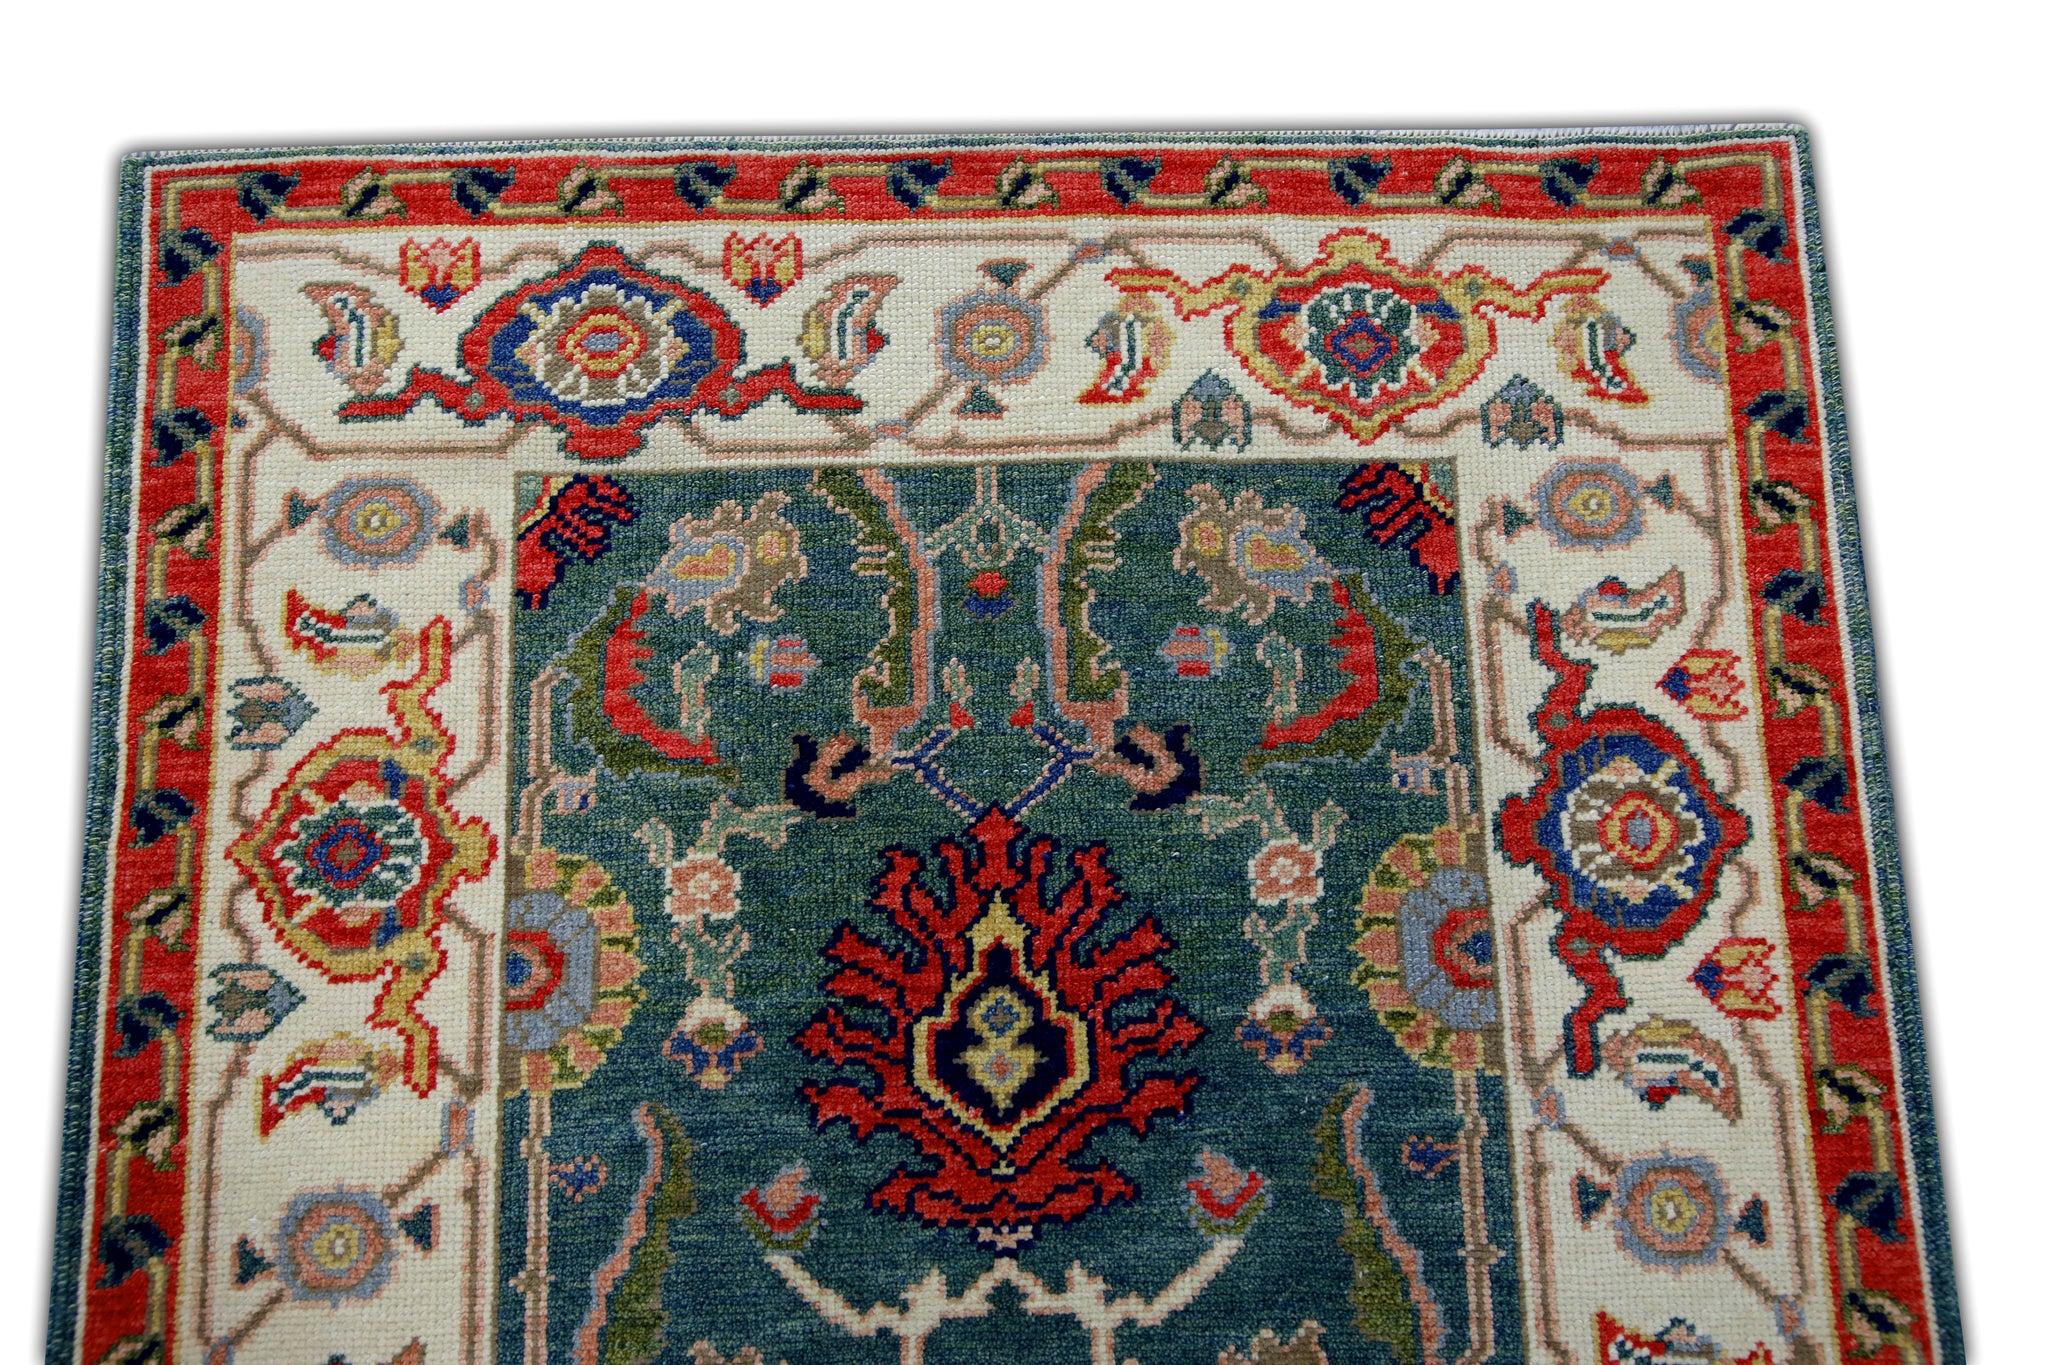 Floral Turkish Finewoven Wool Oushak Rug in Red, Green, and Blue 2'9